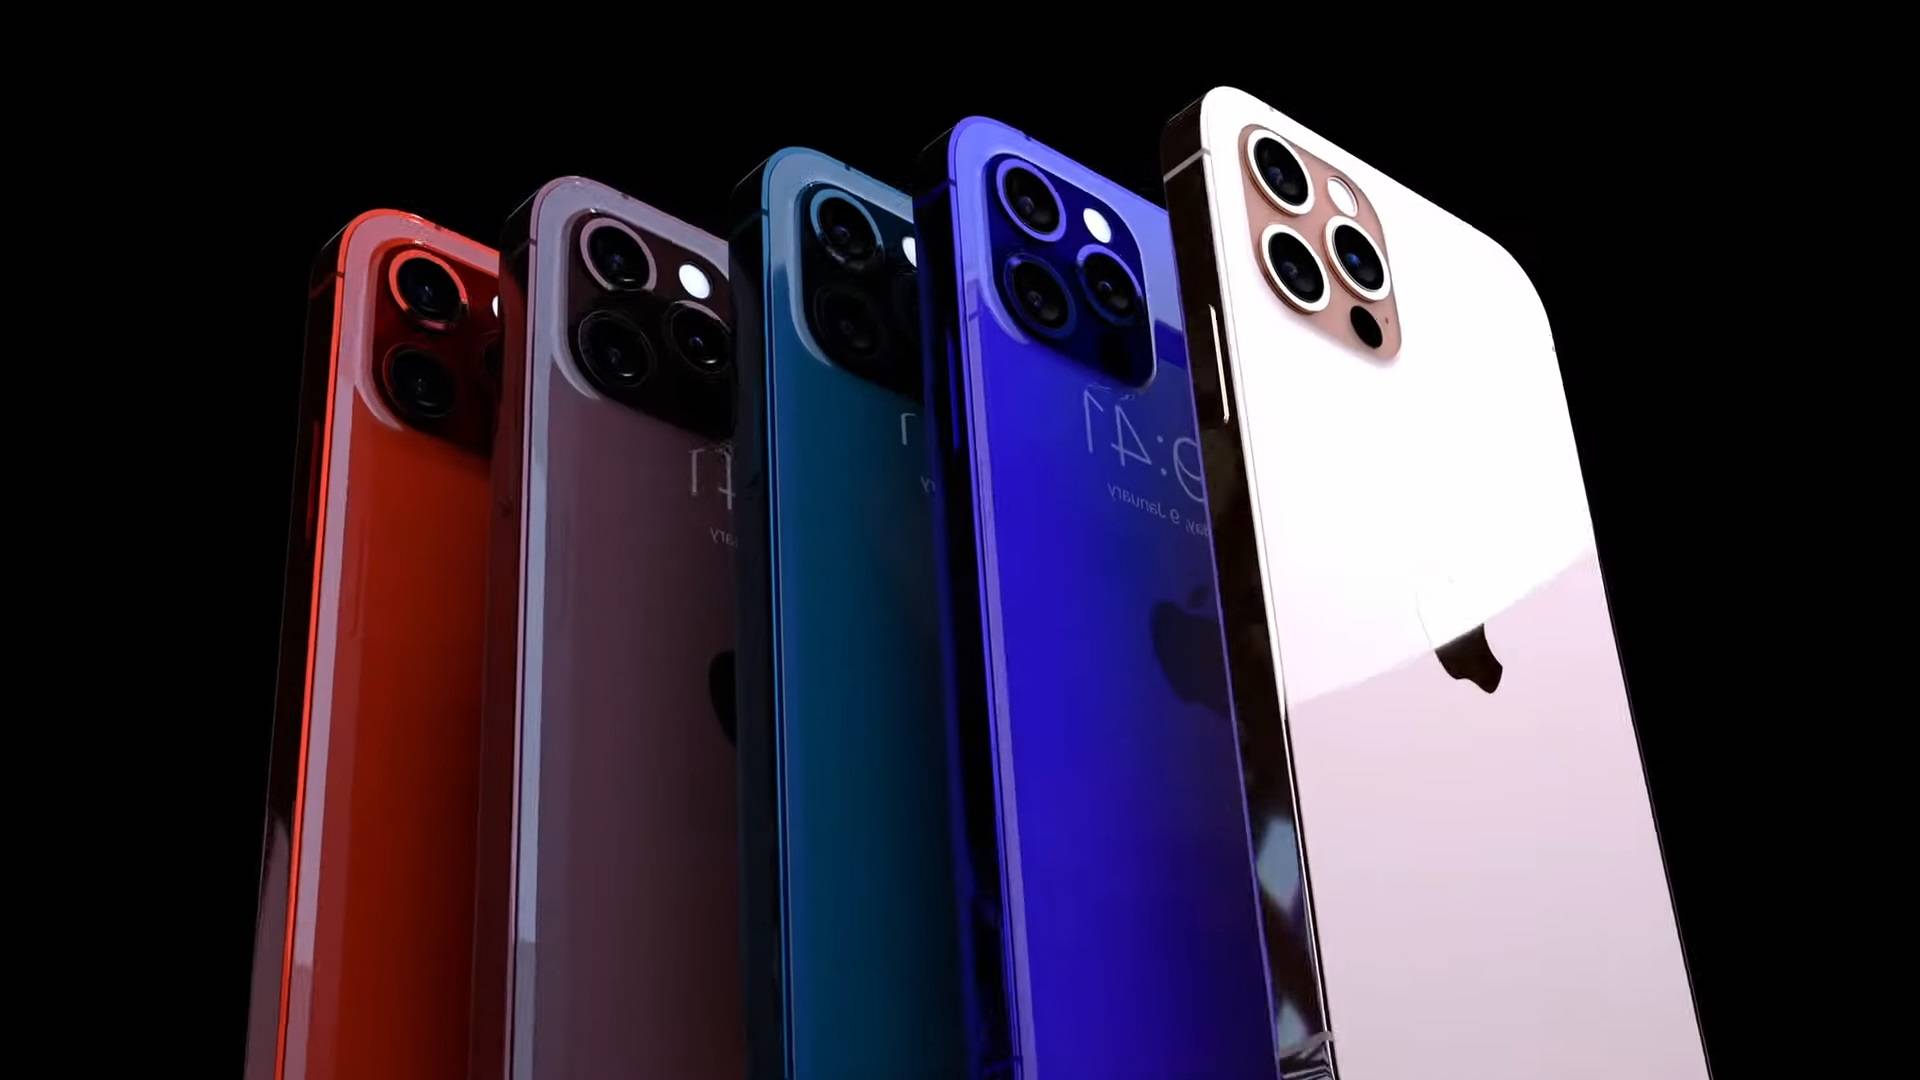 Apple’s iPhone 13 launches day after as of late, but you would possibly possibly maybe maybe be in a position to peek it factual now in this shining video